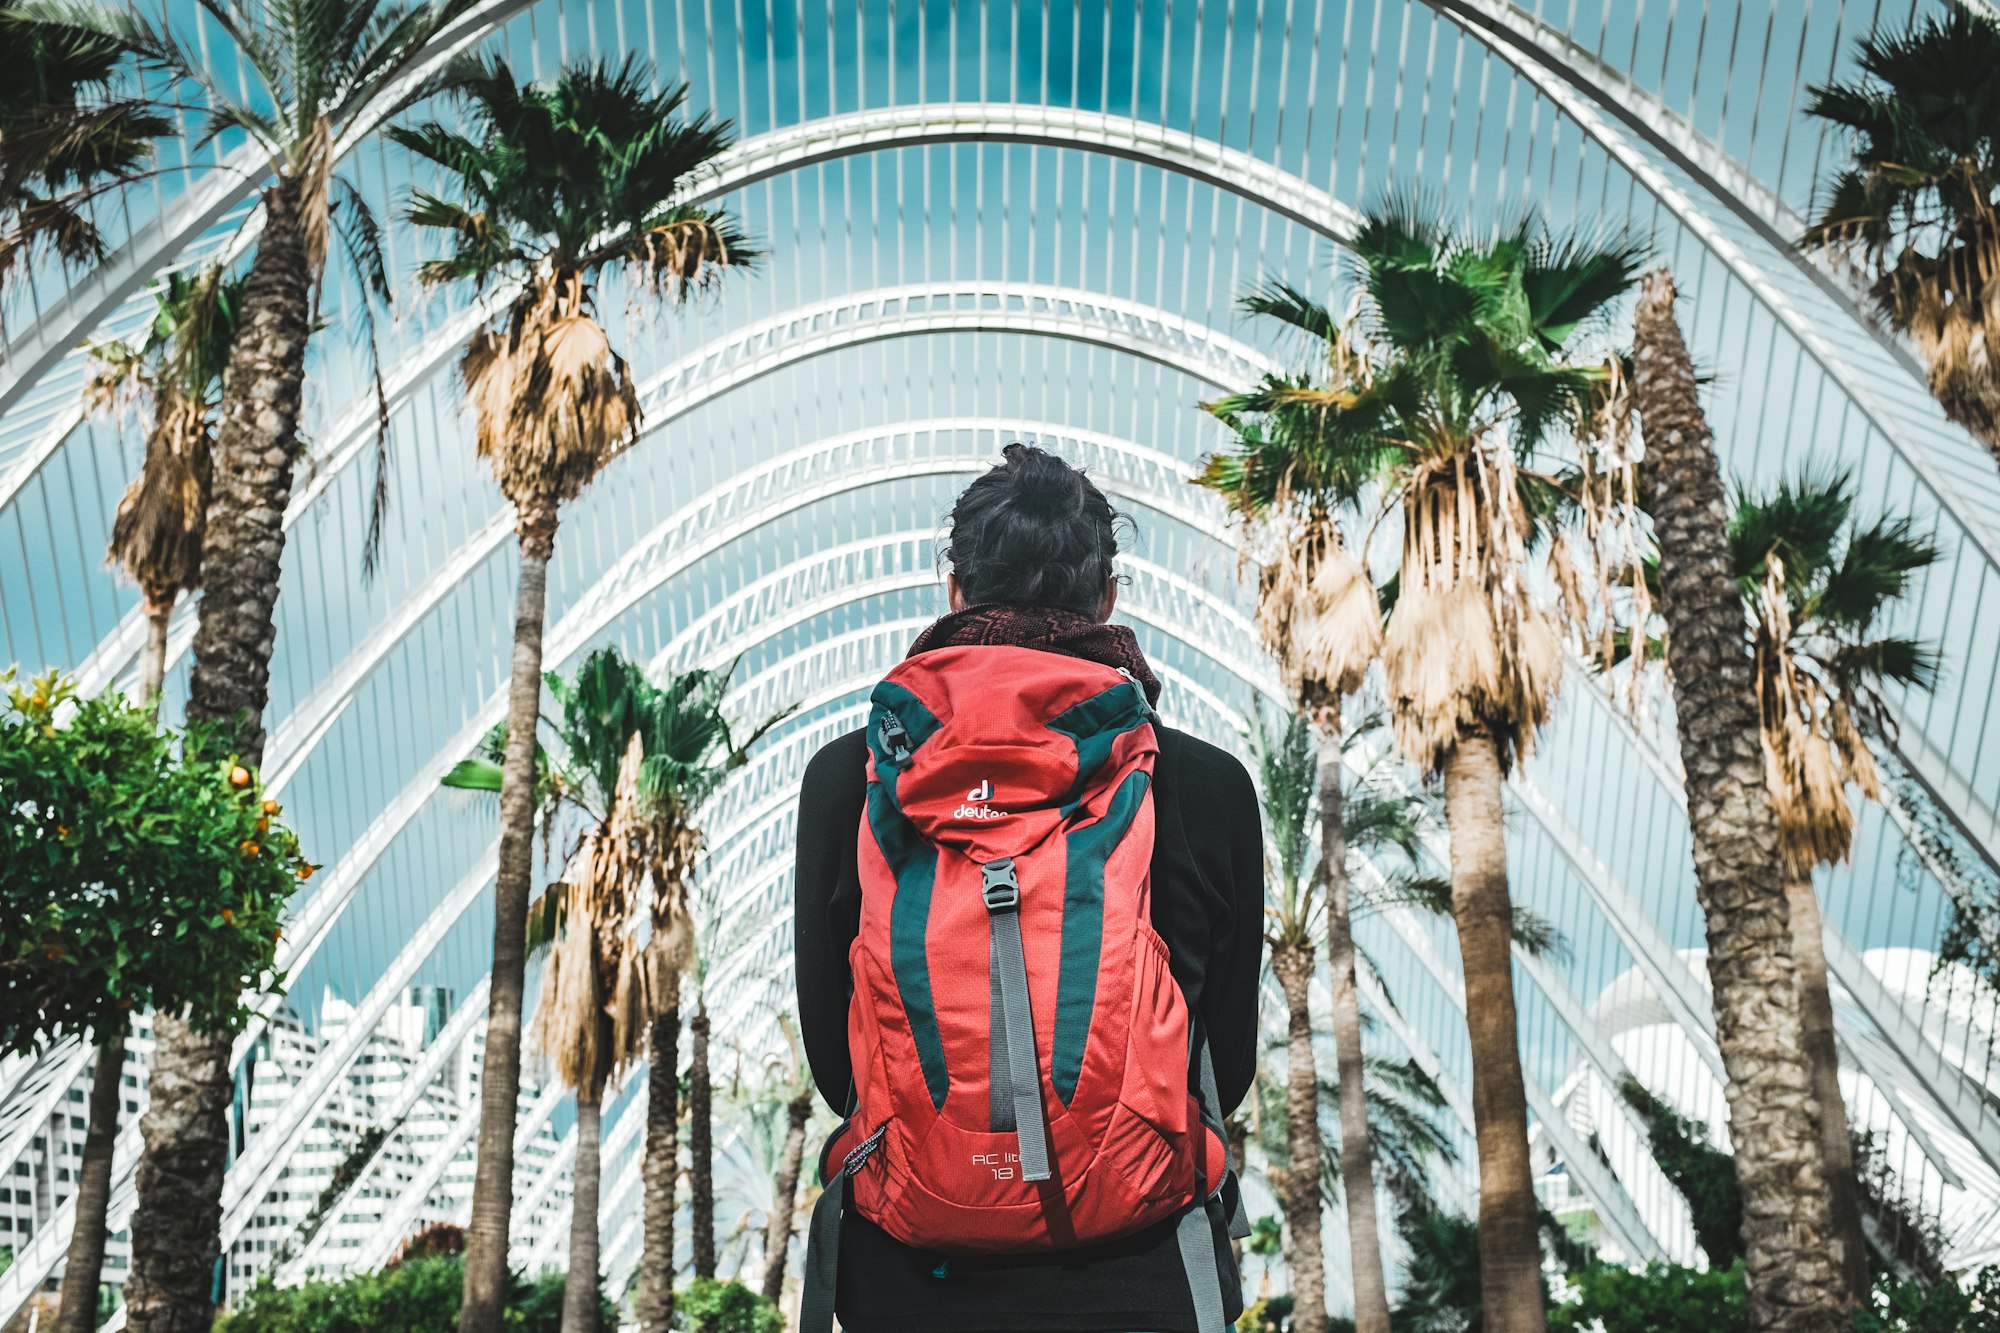 Looking For The Best Travel Backpack For Women In 2022? We've Got You Covered!